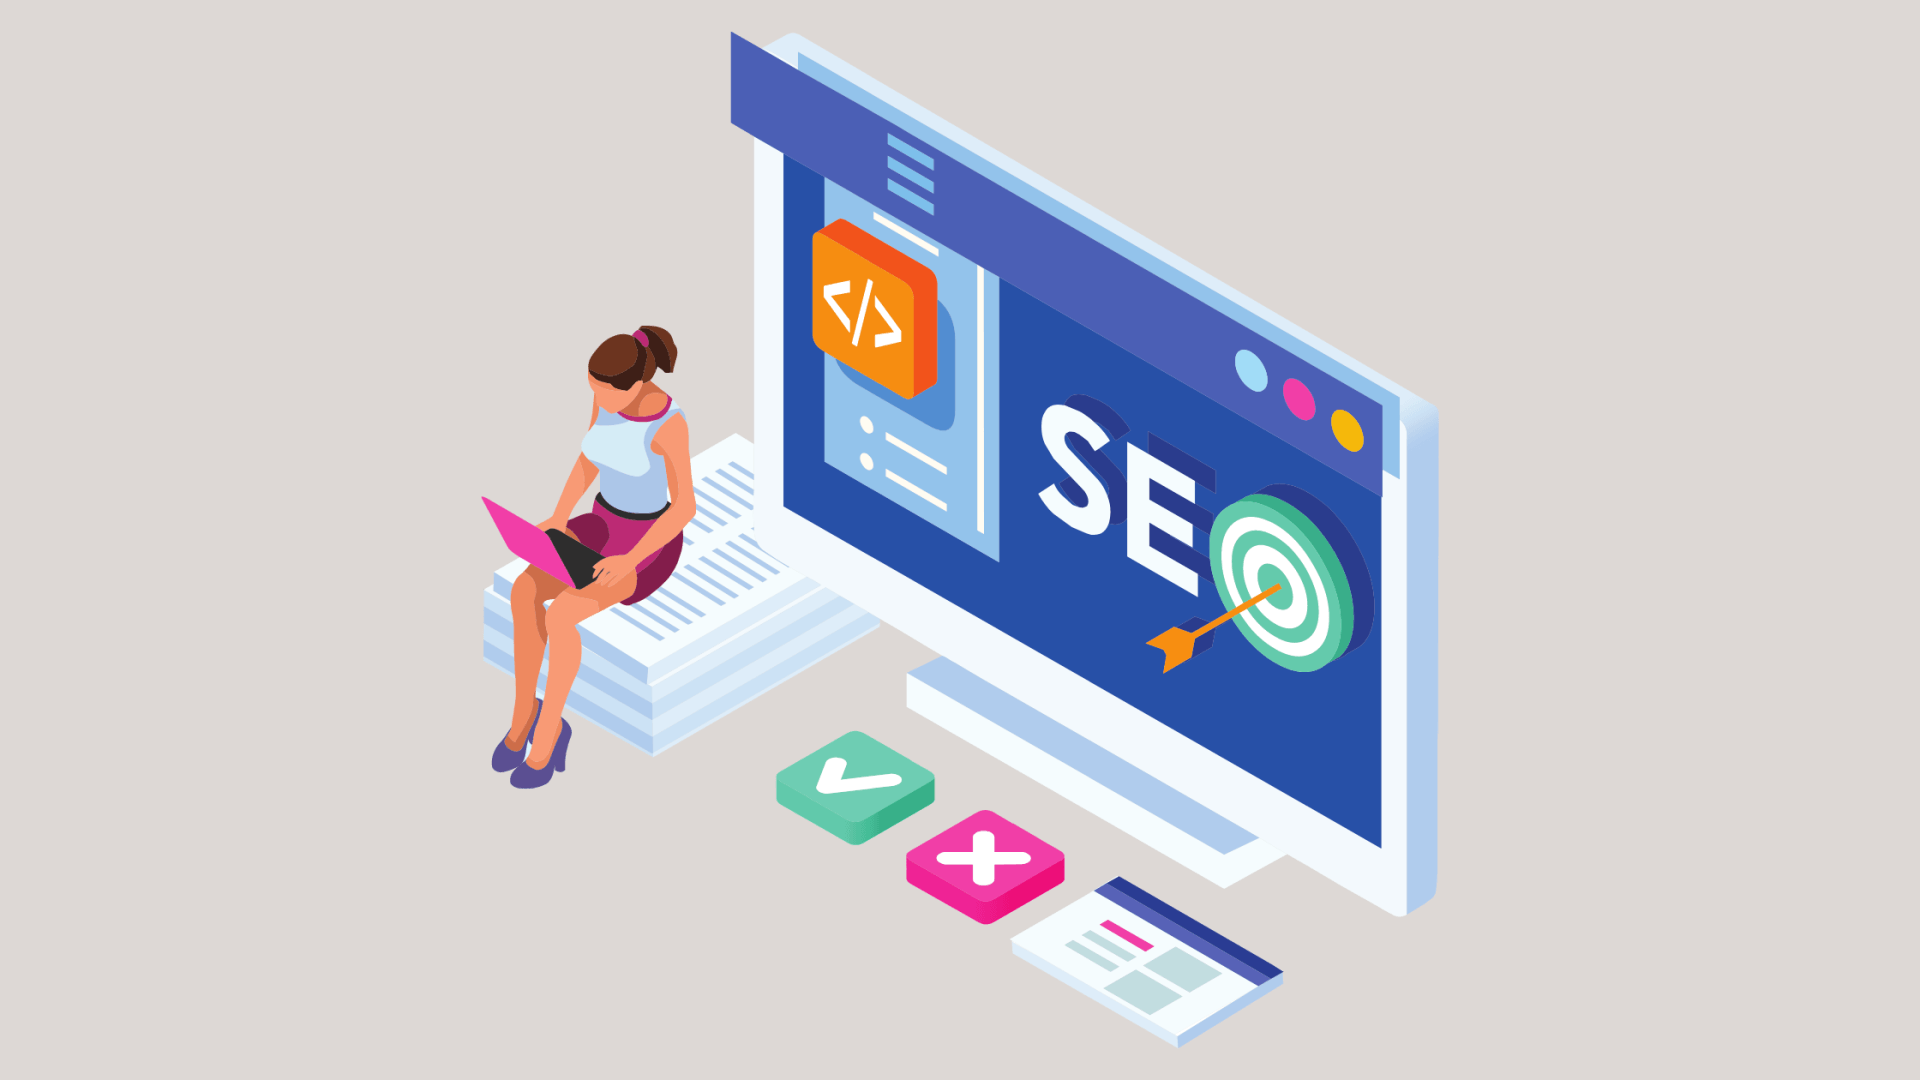 seo services - illustration for search engine optimization